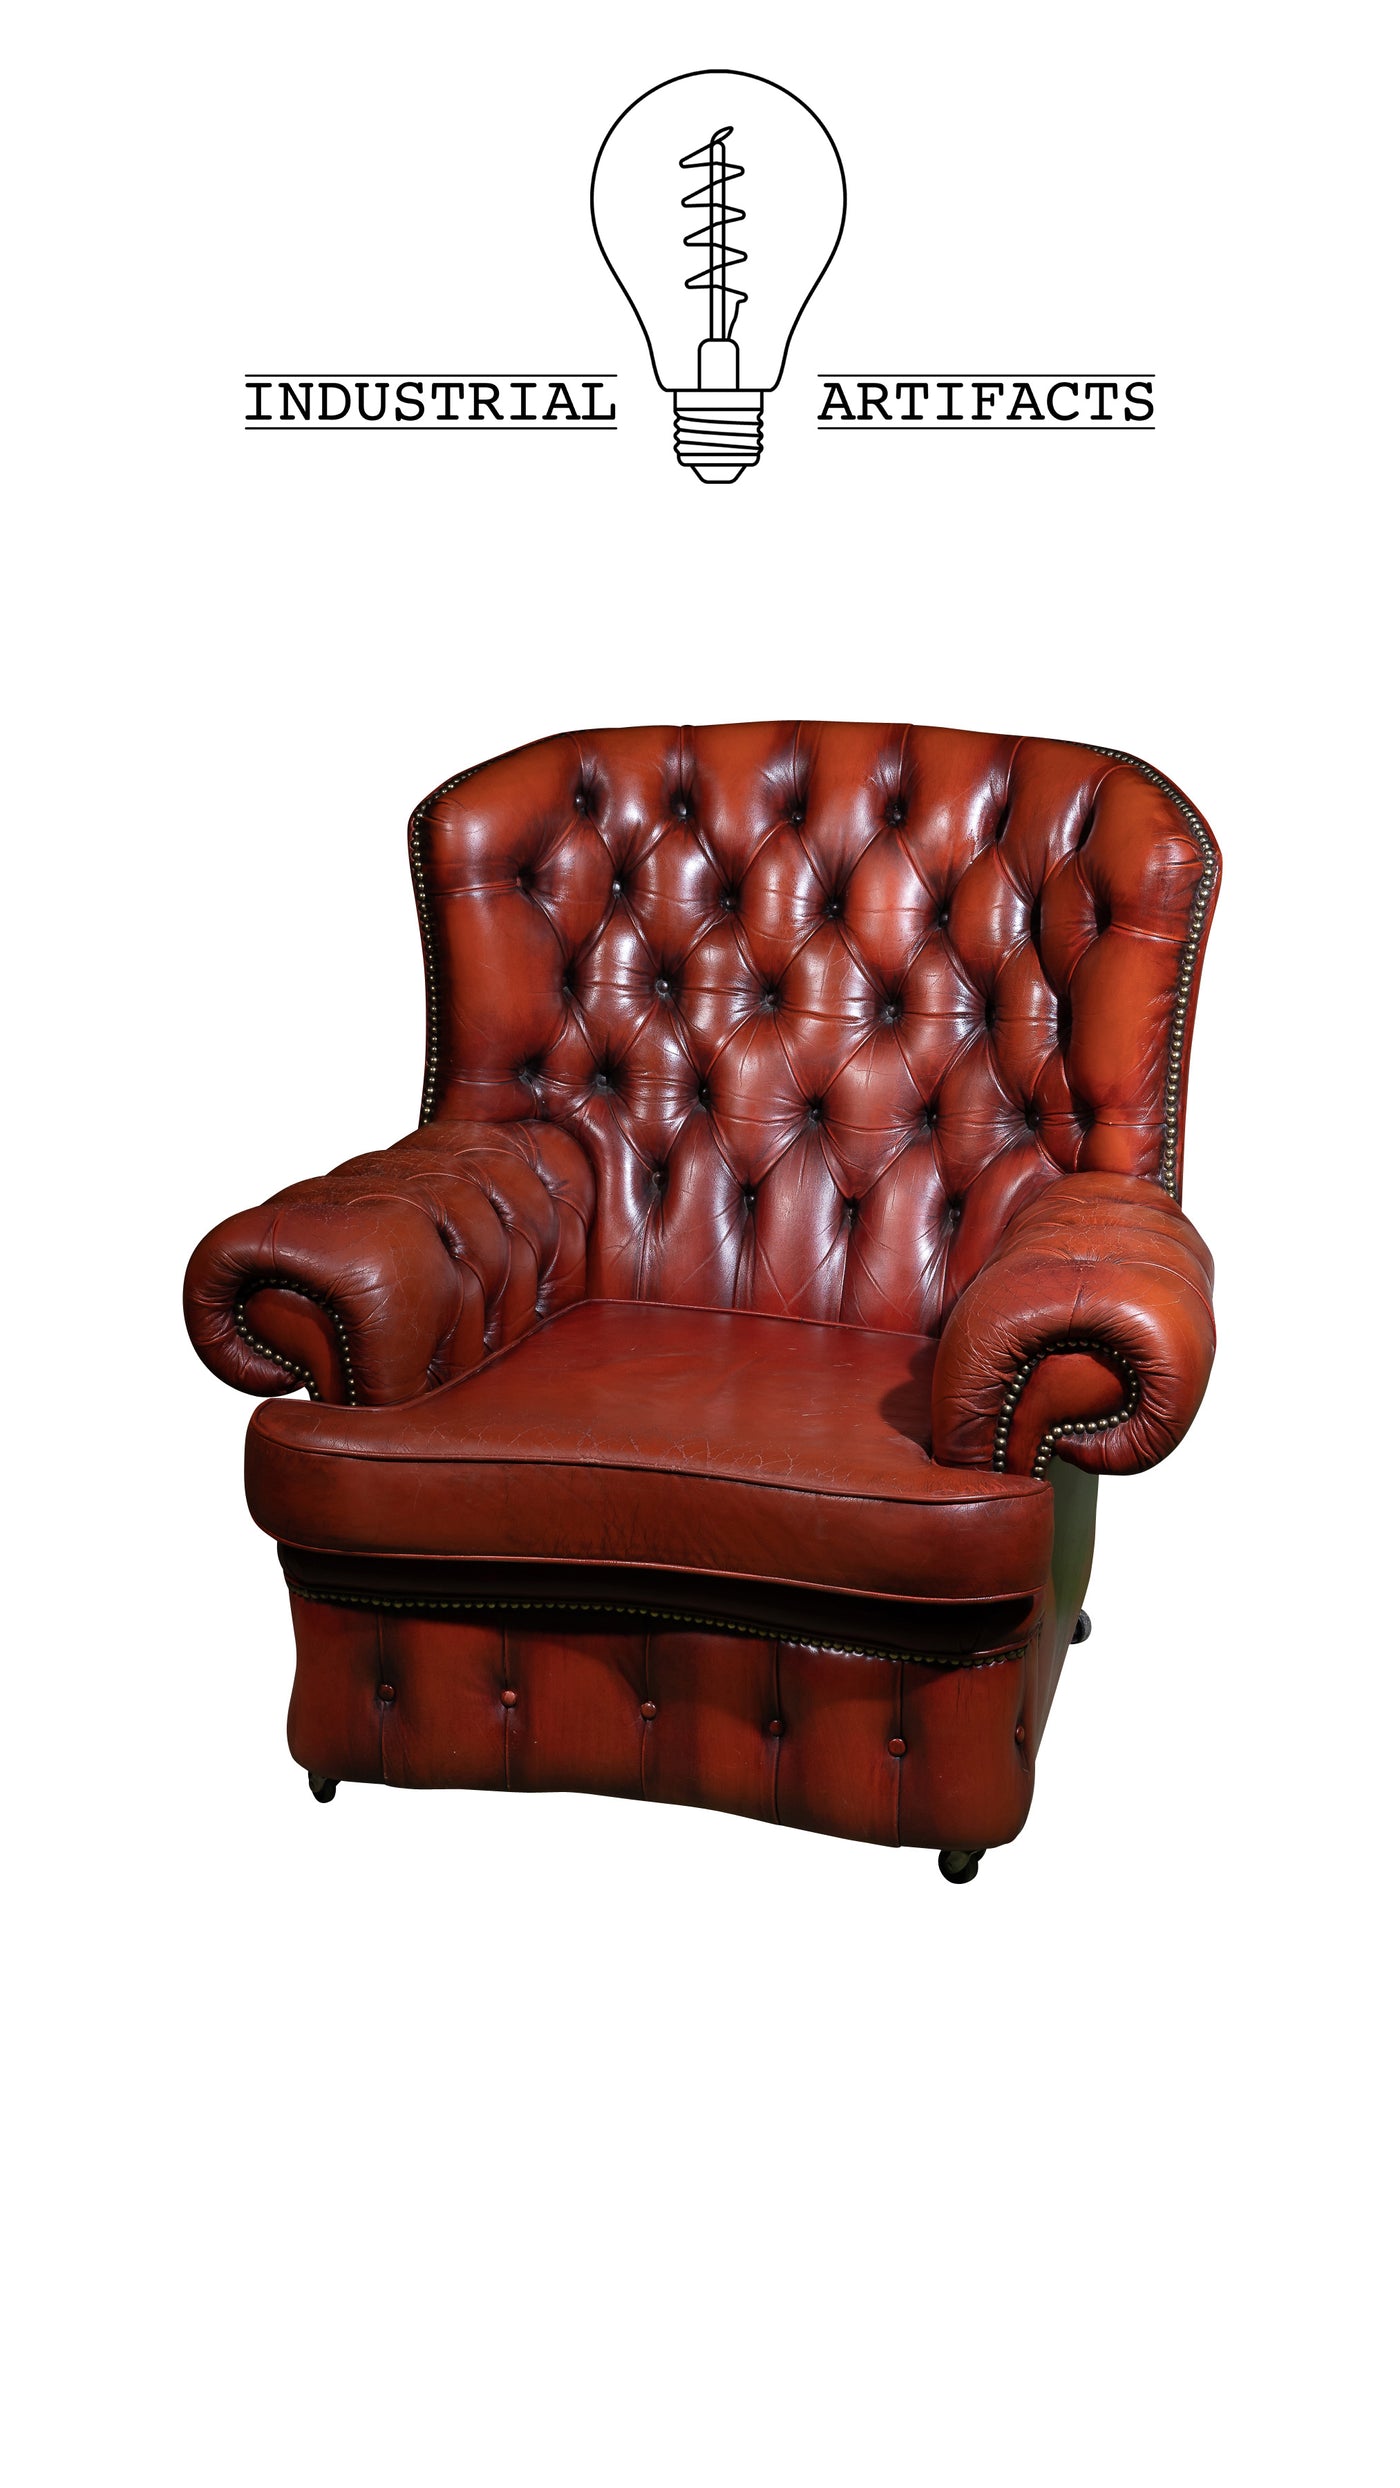 Vintage Tufted Chair in Mandarin Red